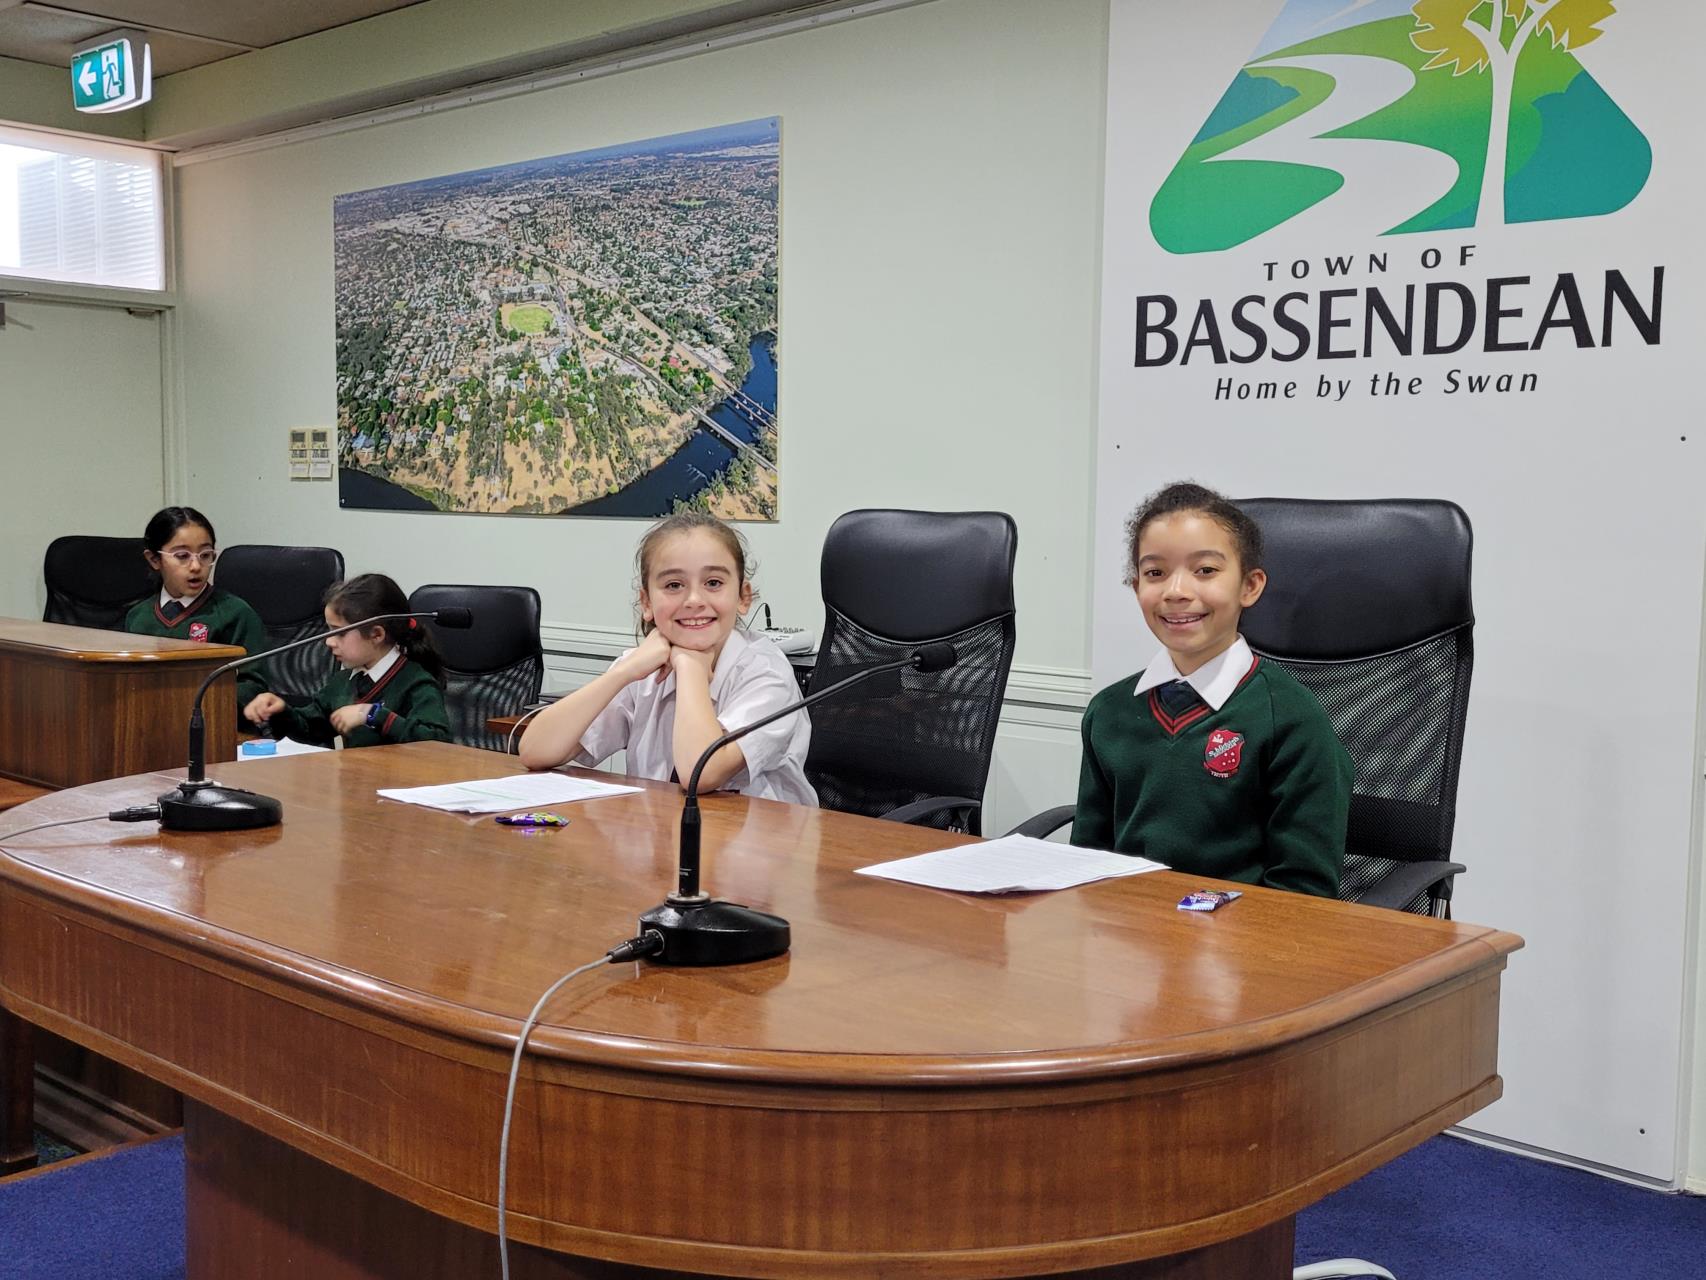 St Michael's Primary School students visit to Council Chambers